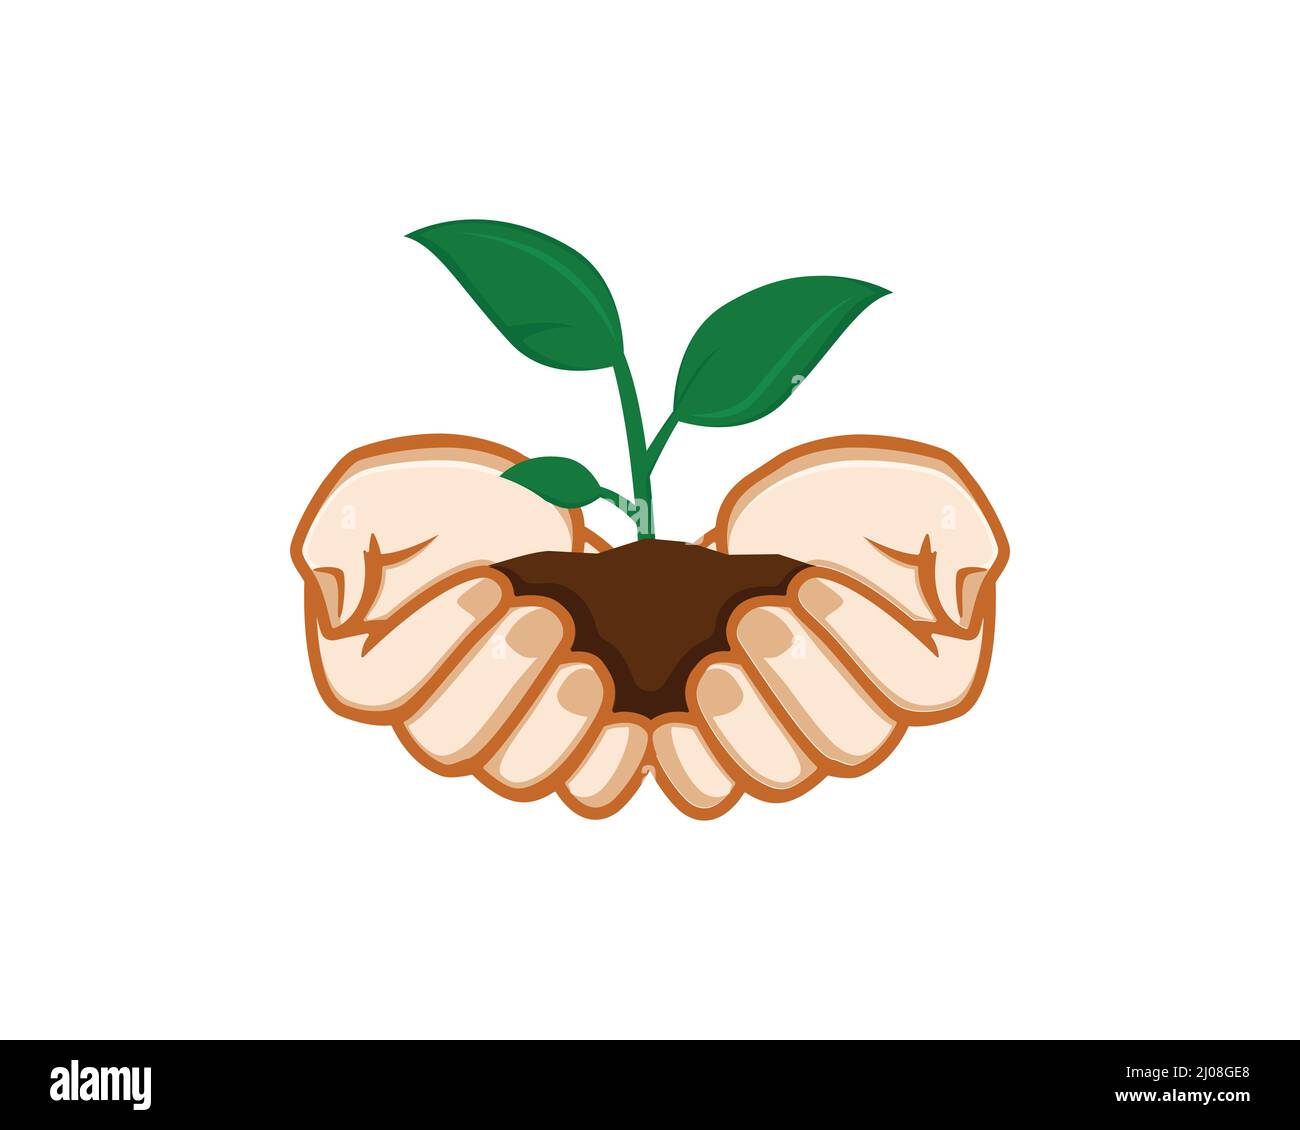 Green Plants Sustainability Illustration and Environmental Issue Symbol with Hands Holding a Tiny Plants Stock Vector